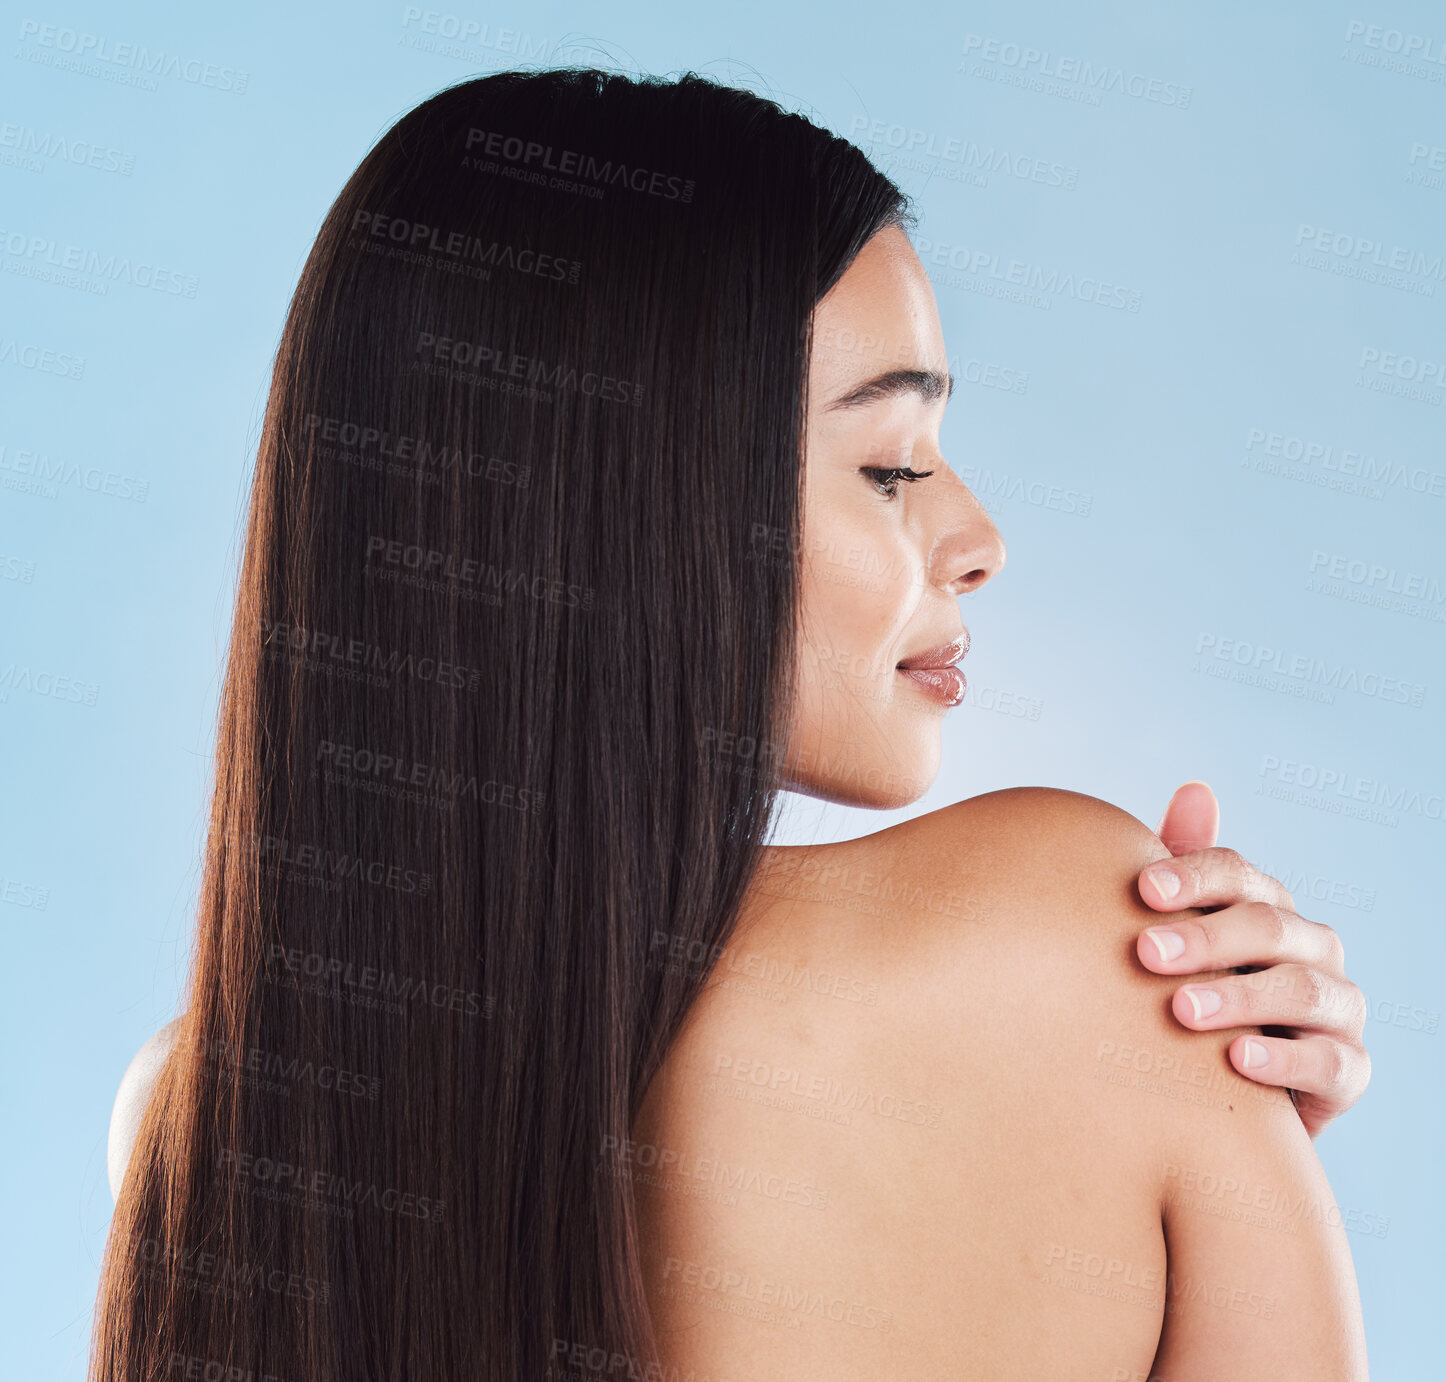 Buy stock photo One beautiful young hispanic woman with healthy skin and sleek long hair looking over and touching shoulder while posing against a blue studio background. Mixed race model with flawless complexion and natural beauty